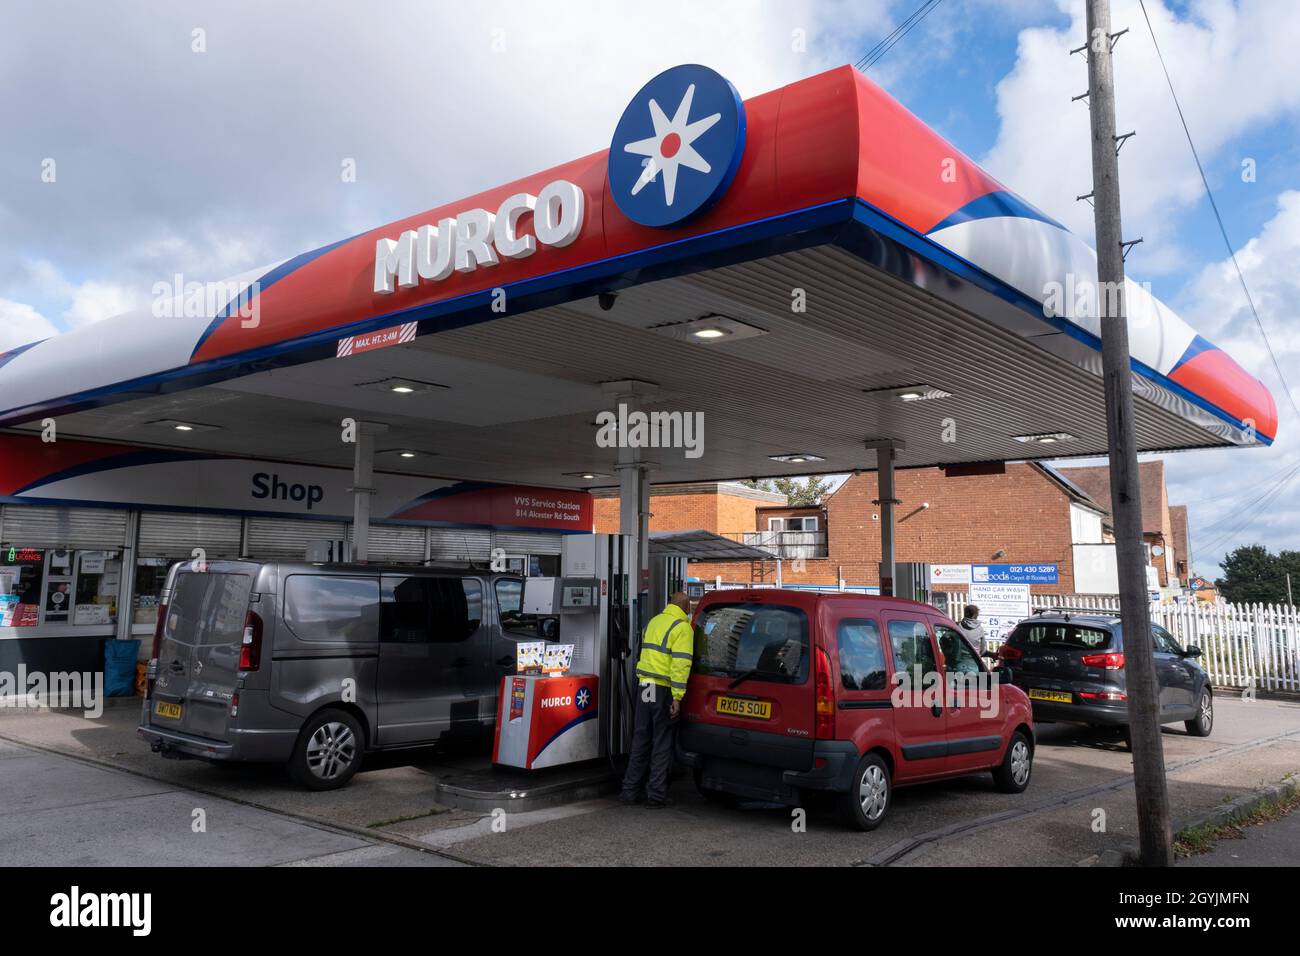 As the fuel crisis in the UK continues, this Murco petrol station is open for business and motorists drive in with their cars to fill up with fuel, which is being sold at normal prices on 29th September 2021 in Birmingham, United Kingdom. While some forecourts remain closed with little or no fuel, there is confusion amongst the public as to whether they should buy fuel now or wait. This has led to panic buying and long queues outside some petrol stations as the crisis, which has been caused by a lack of HGV drivers available to deliver supplies, continues. Stock Photo